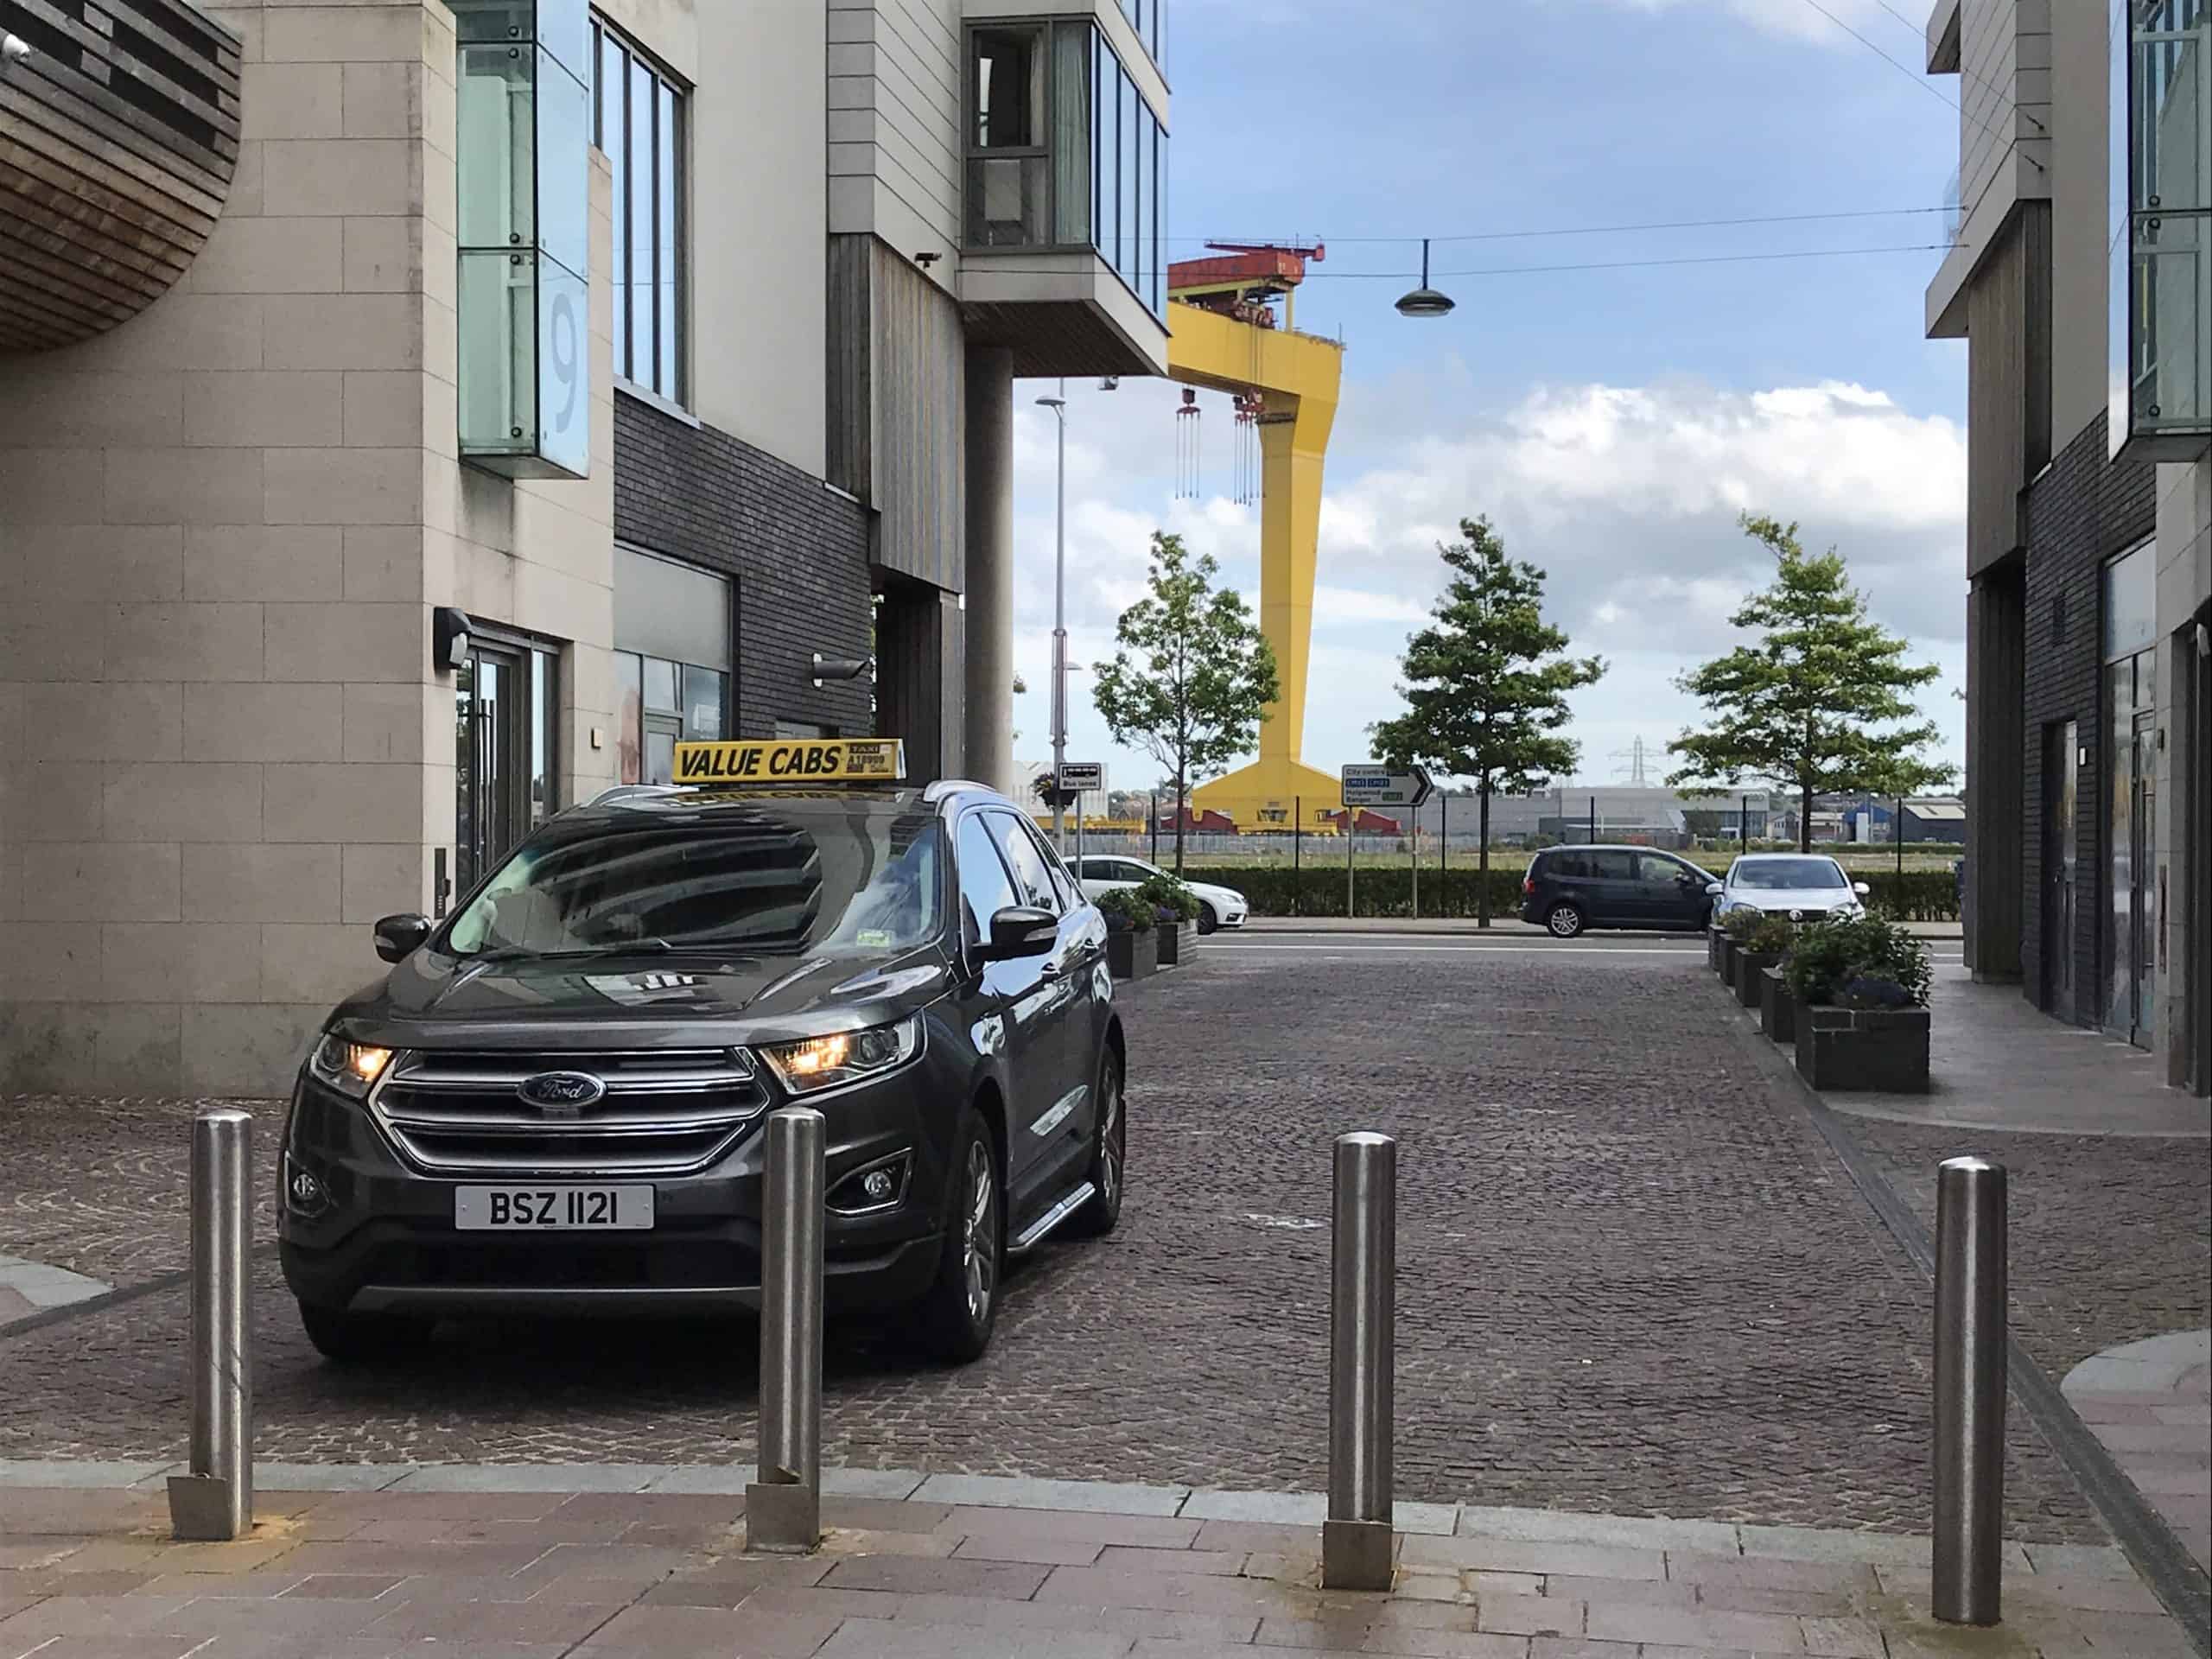 A dark gray SUV as a taxi cab. Parked in a small alley. White and gray apartment buildings along the alley. Behind is the blue sunny partly cloudy skyline with the iconic yellow Samson and Goliath shipbuilding gantry cranes in Belfast, Northern Ireland.